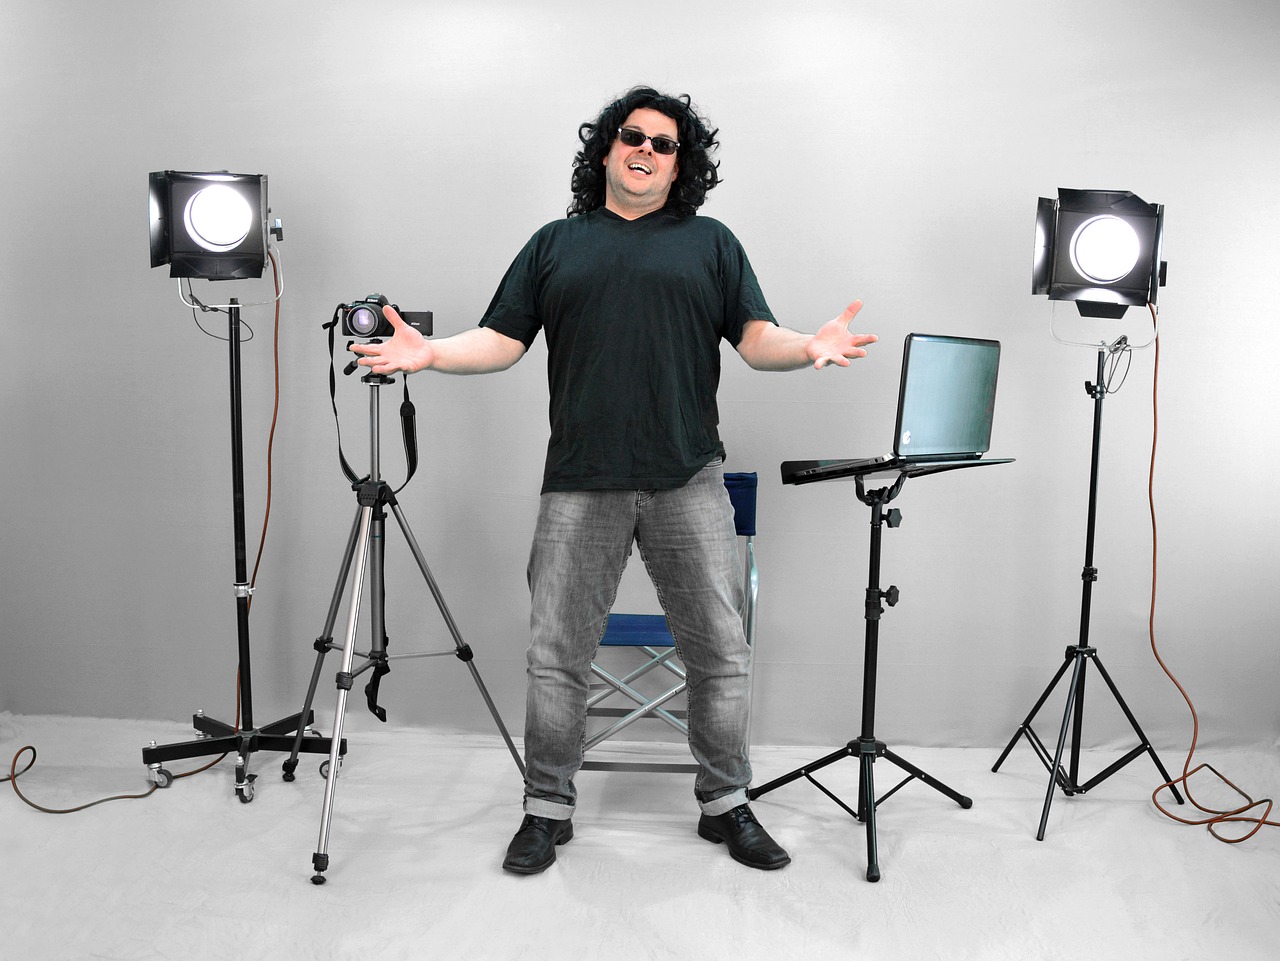 In video production, scrims are metal wire mesh devices that are placed in front of a light source to reduce its intensity while also maintaining its color temperature and quality.